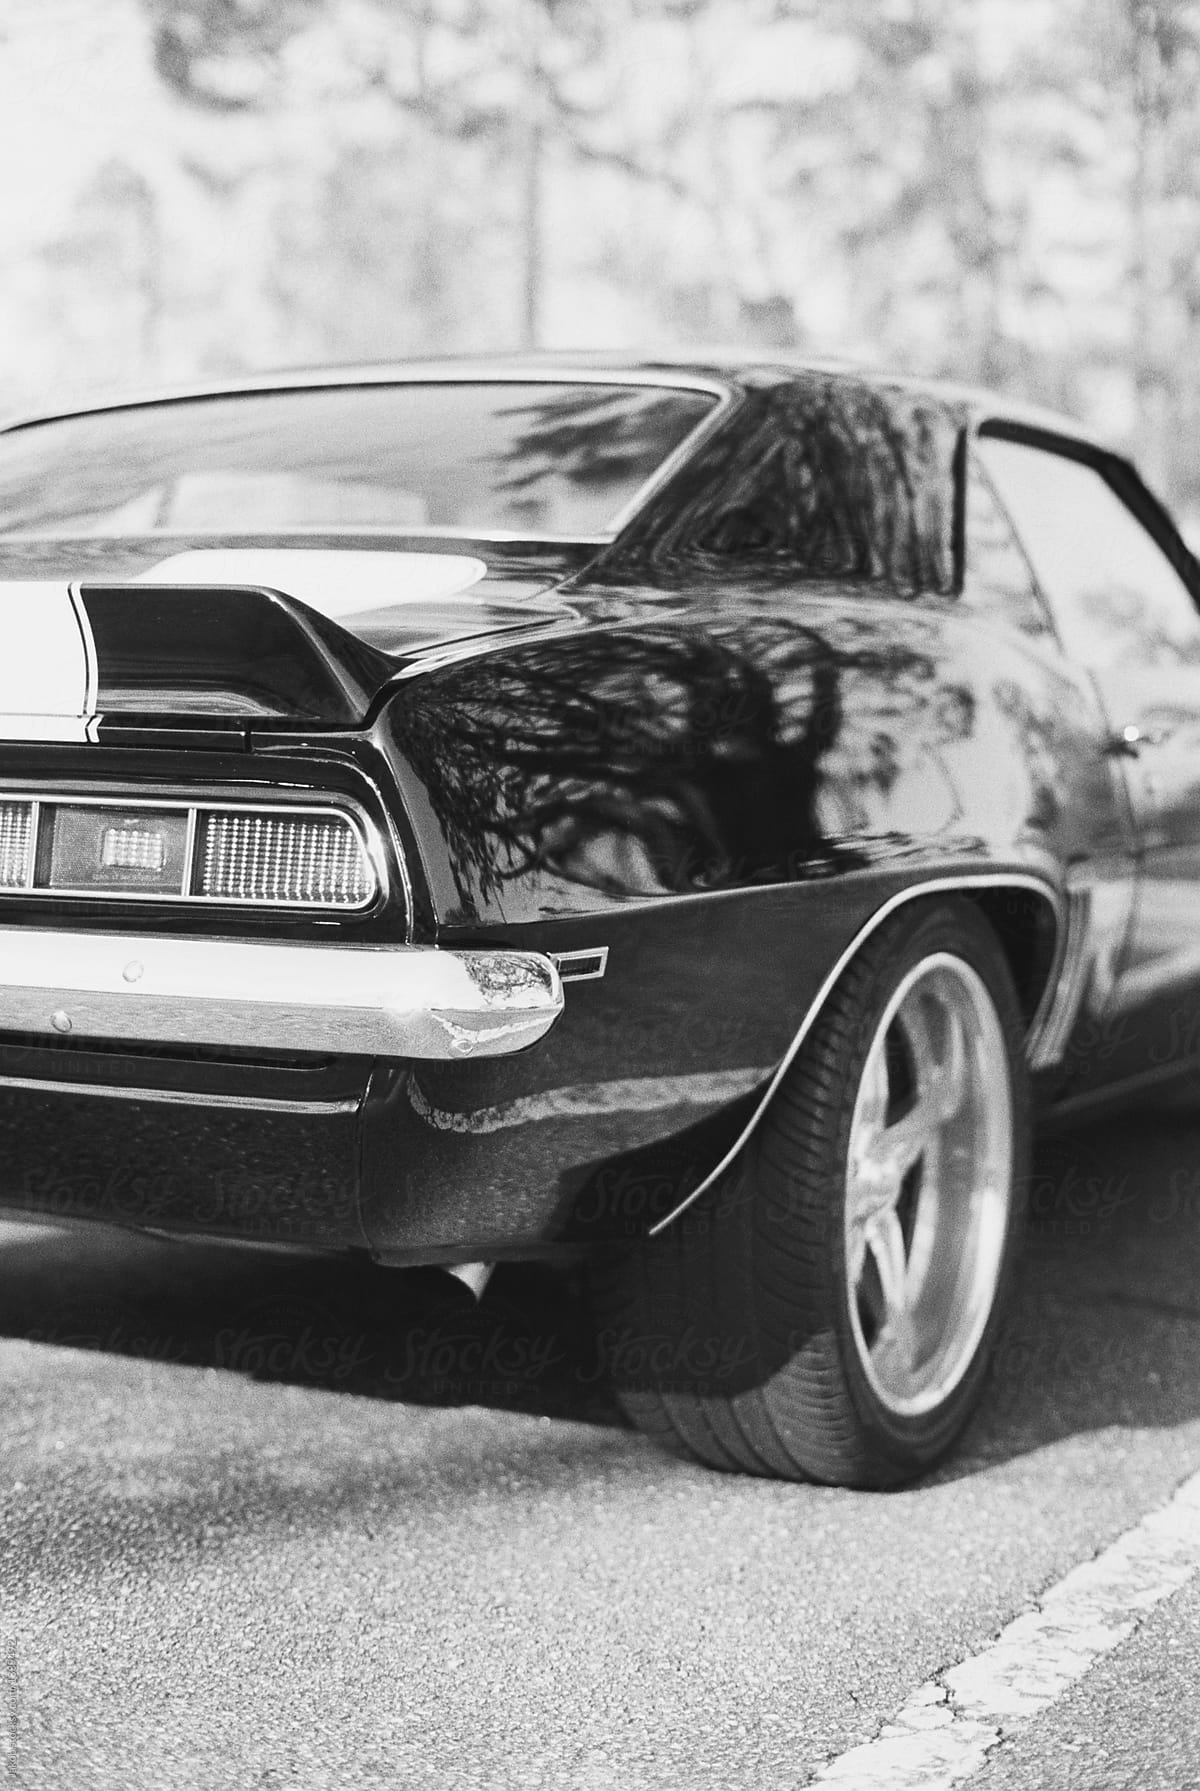 View of the back of an american muscle car